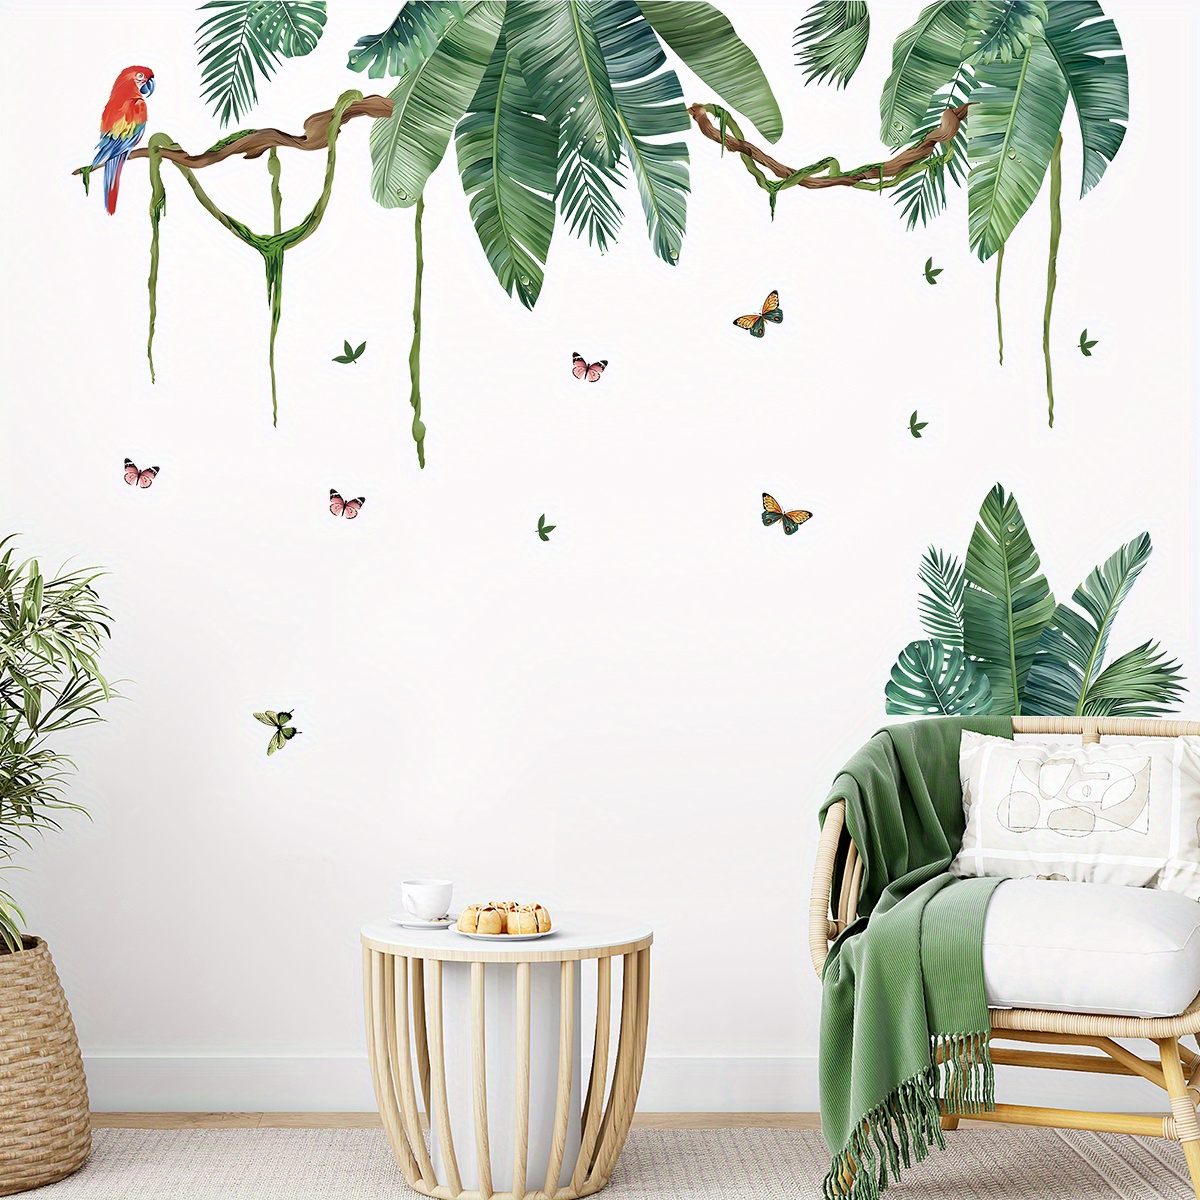 

1pc Watercolor Tropical Leaf Vine & Butterfly Bird Wall Stickers, Removable Pvc Decals, Contemporary Home Decor, Bedroom, Living Room, Home Decoration